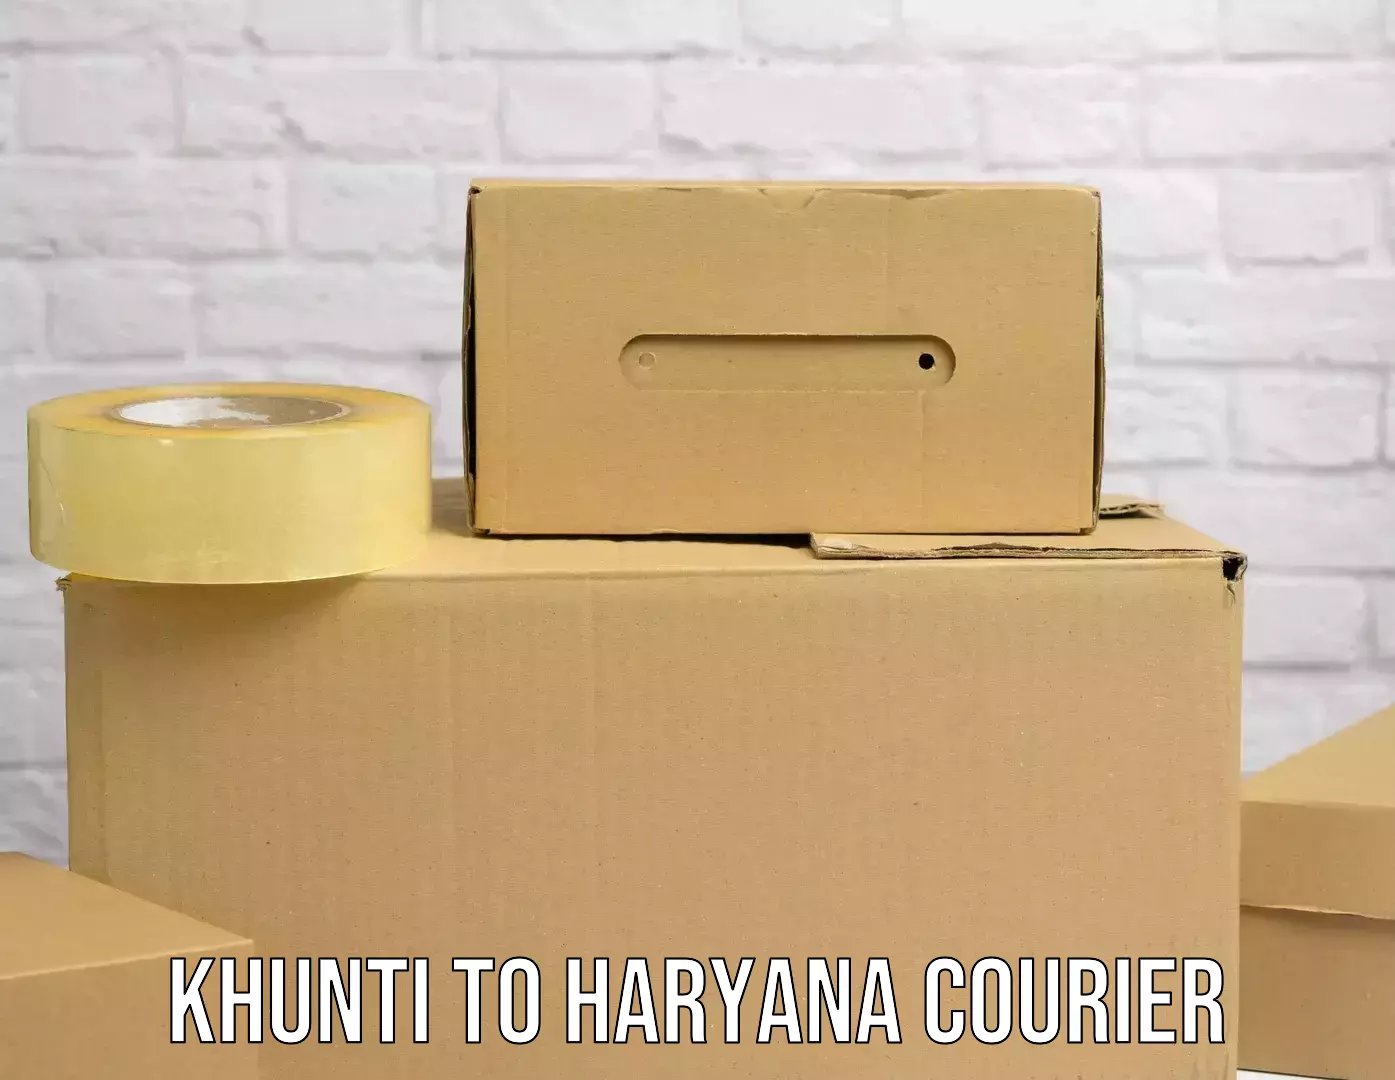 Supply chain delivery Khunti to Chaudhary Charan Singh Haryana Agricultural University Hisar